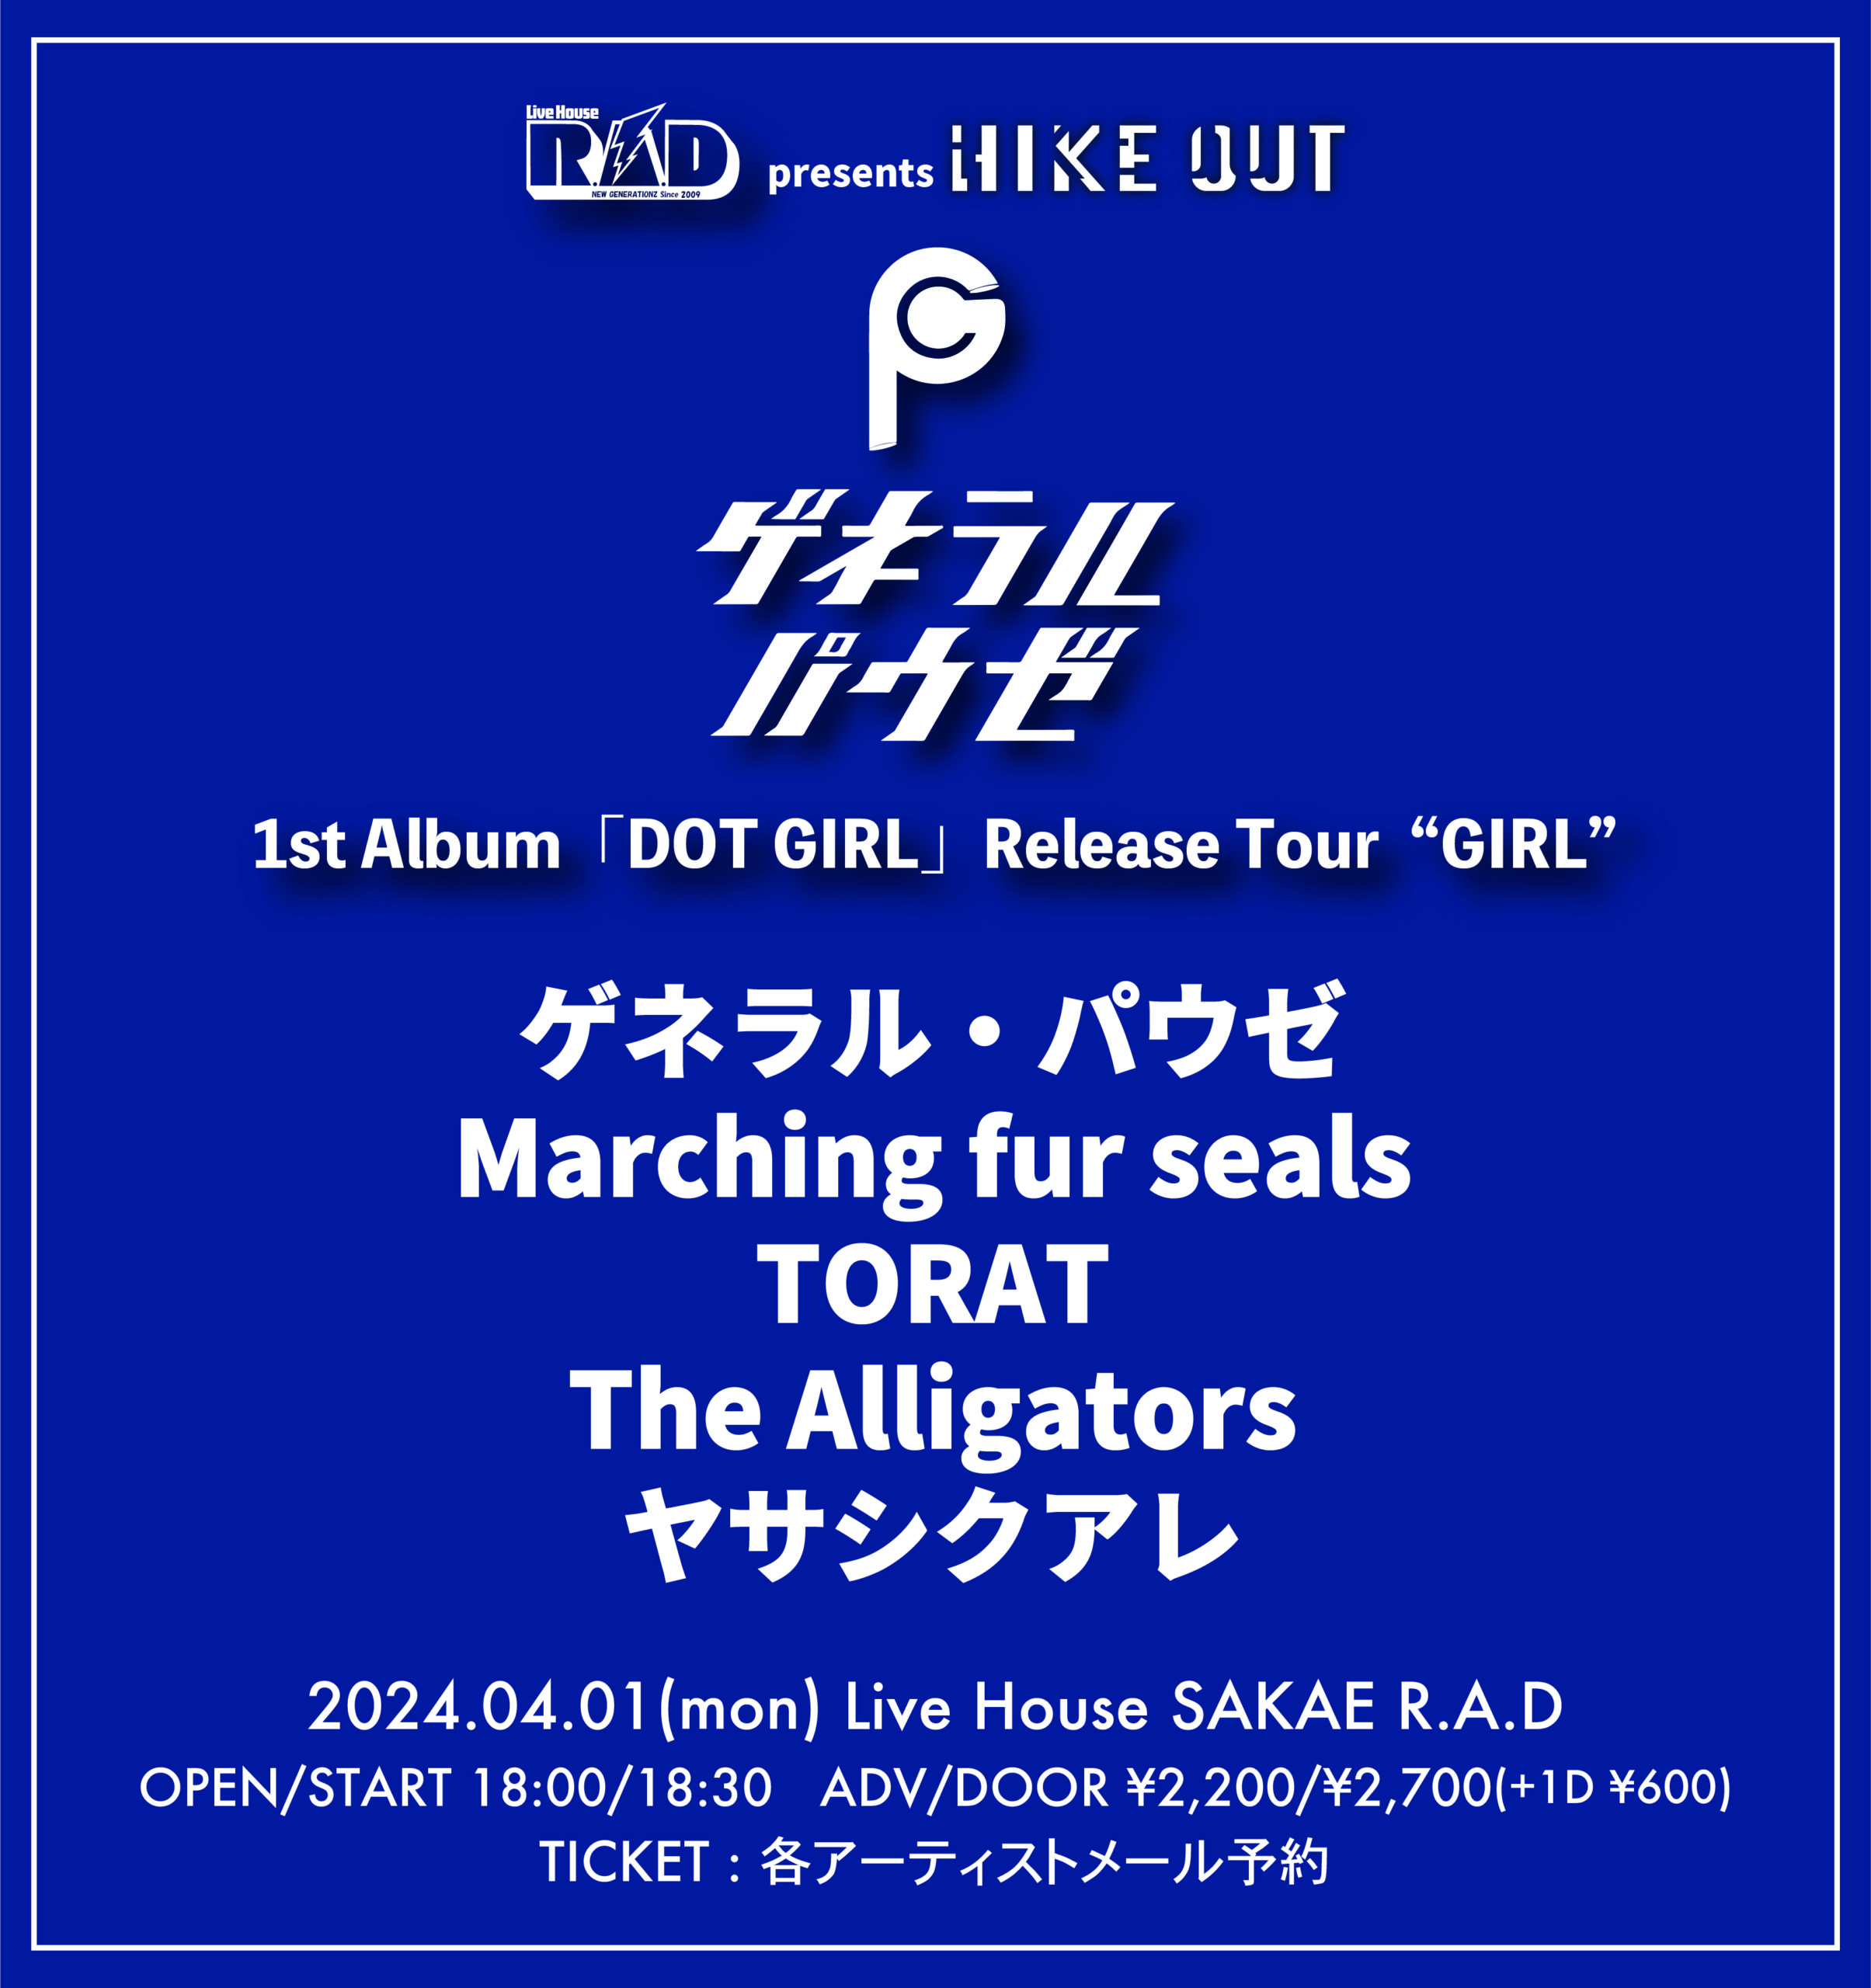 R.A.D presents.“HIKE OUT” ゲネラル・パウゼ 1st Album「DOT GIRL」Release Tour “GIRL”